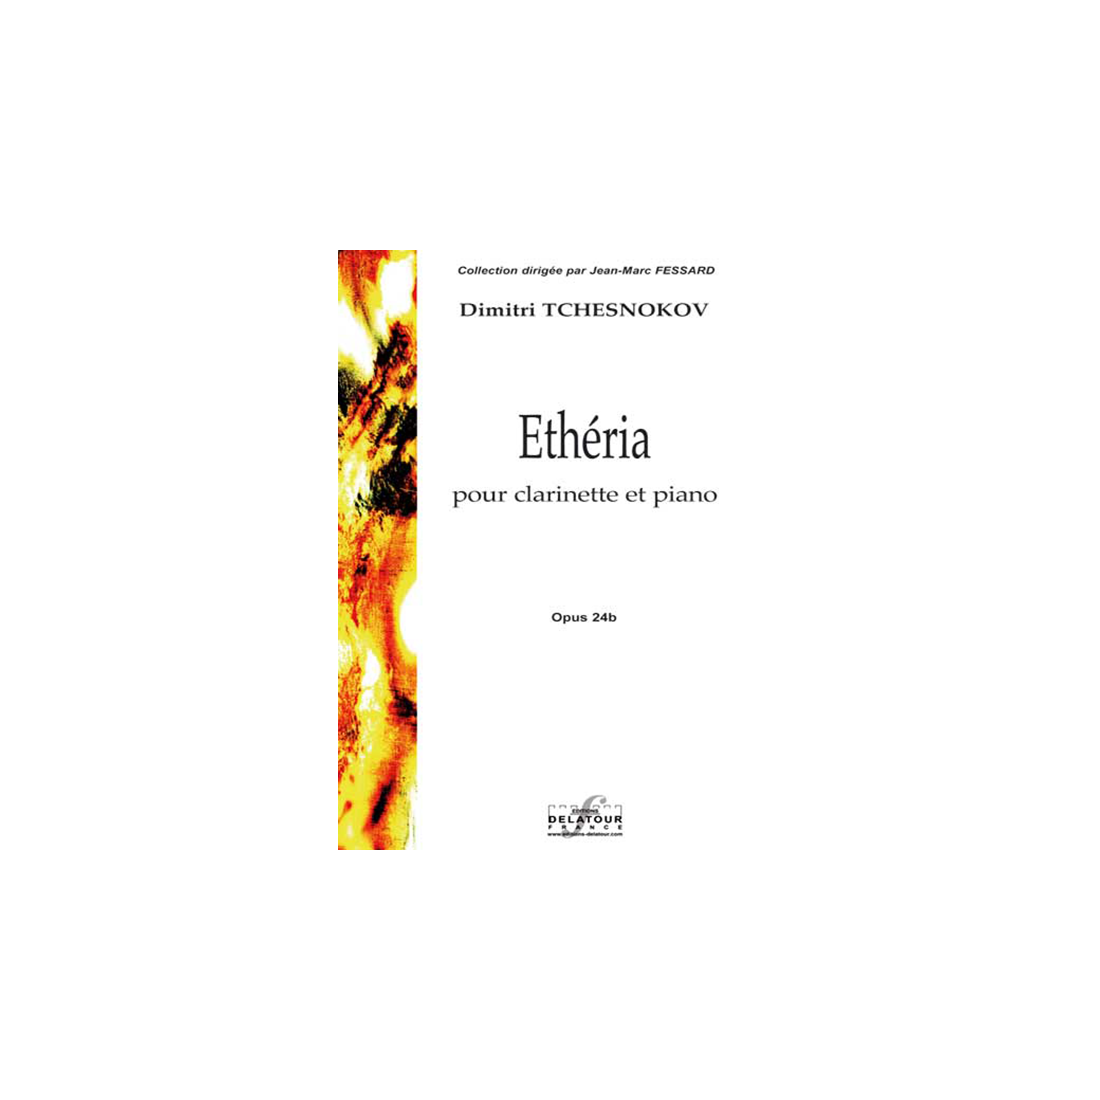 Ethéria for clarinet and piano